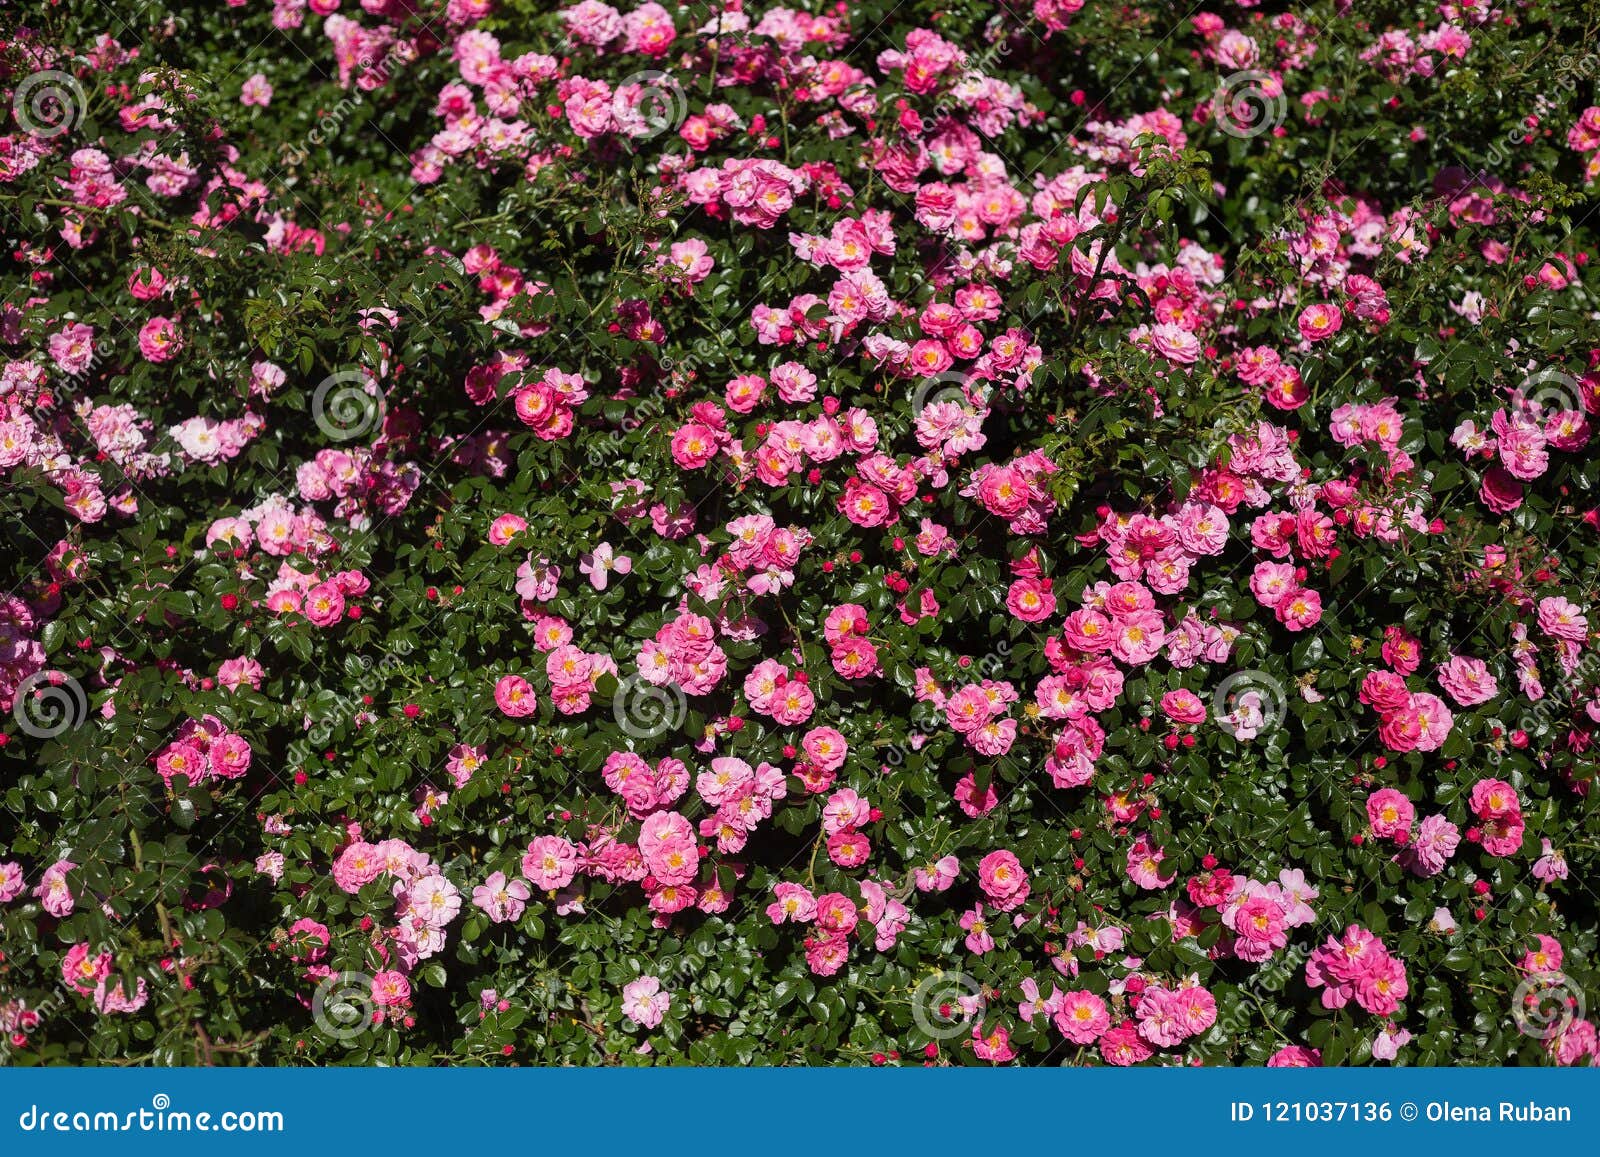 Big Bush With Small Pink Flowers Stock Photo Image Of Bushes Nature 121037136